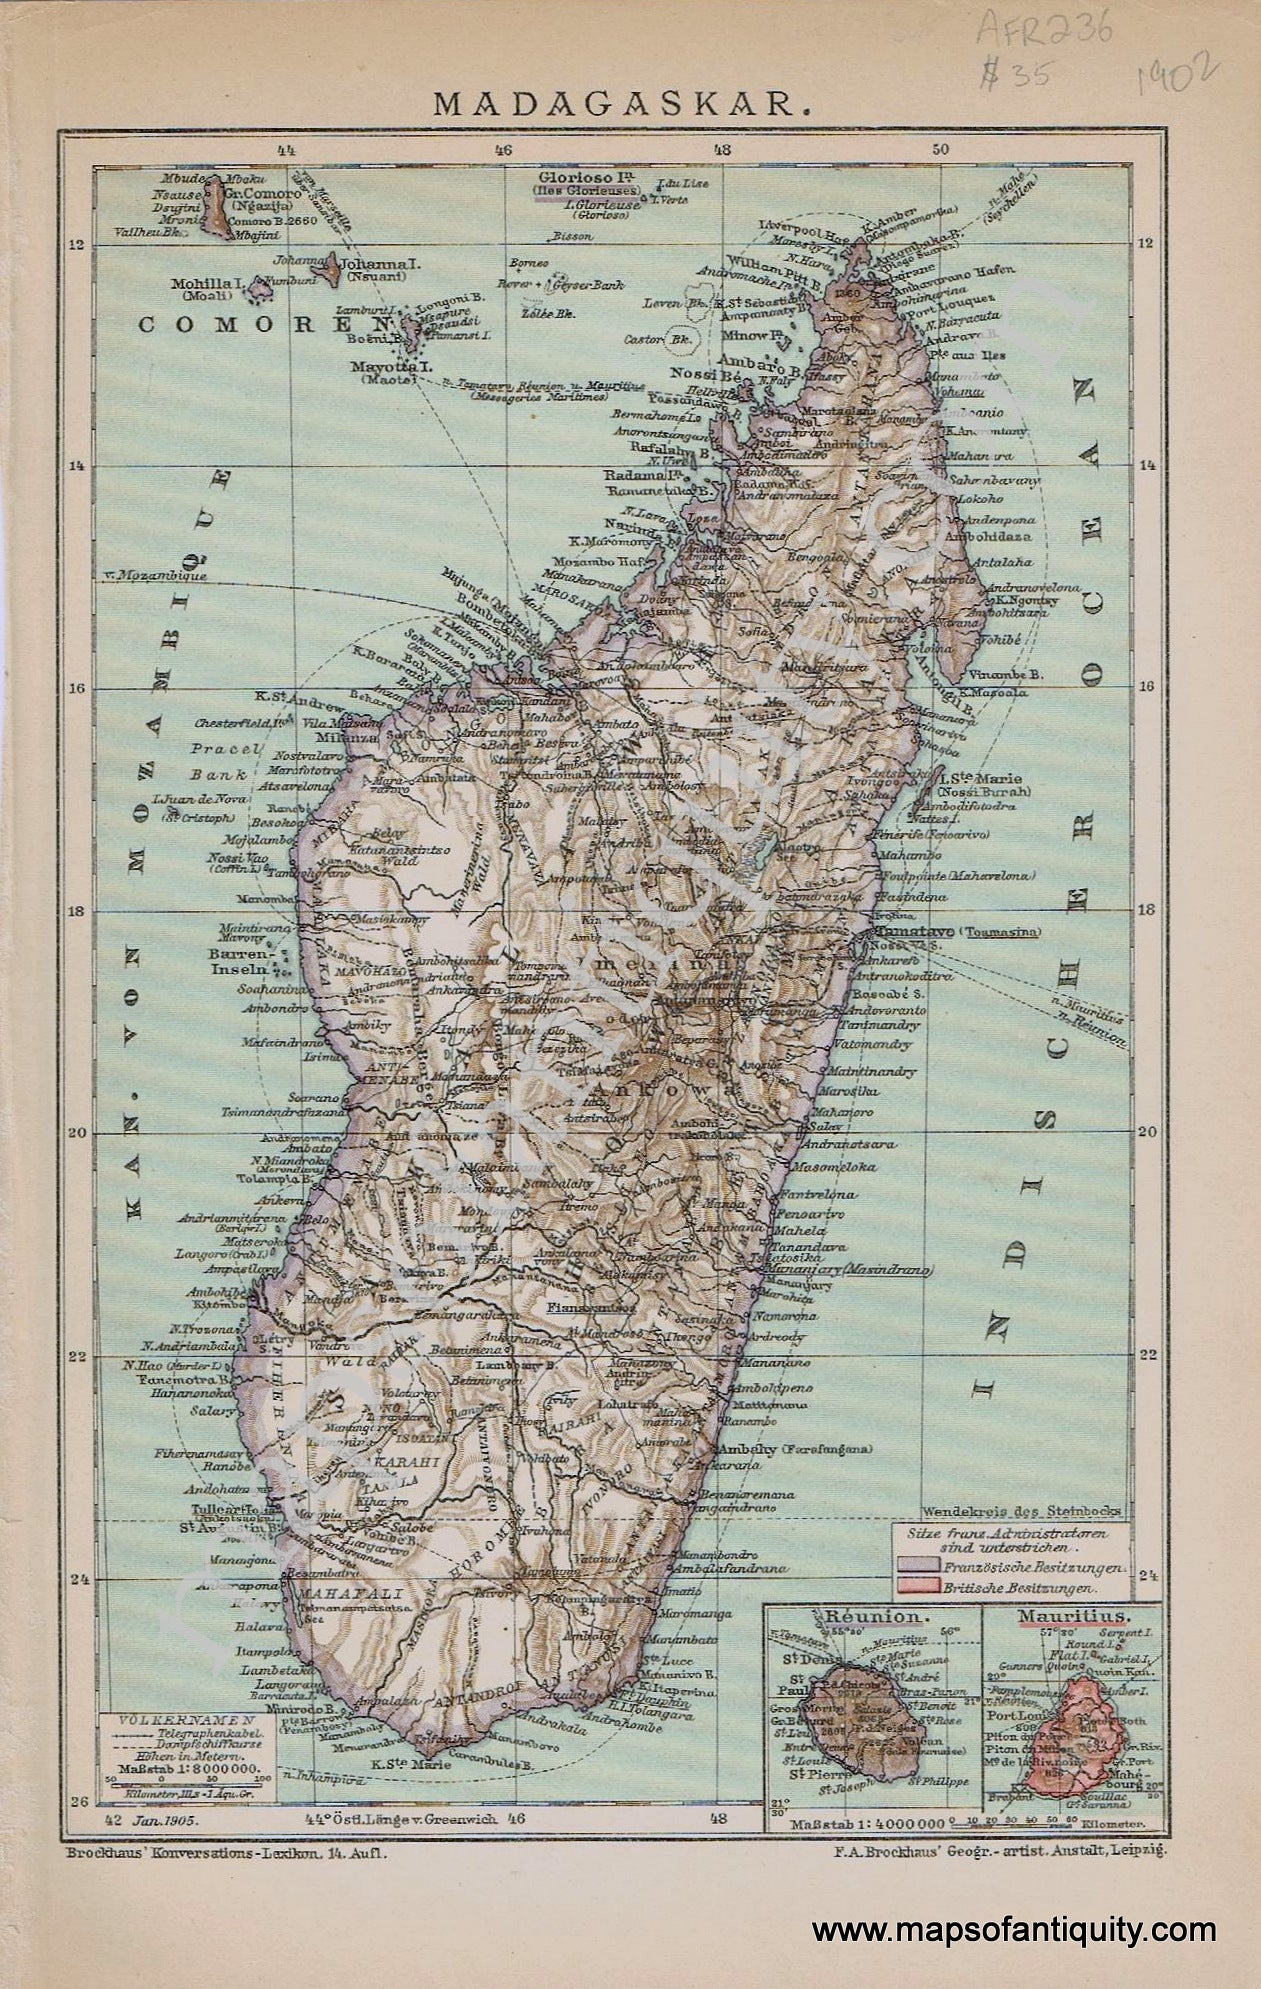 Antique-Printed-Color-Map-Madagascar-Madagaskar-1902-Brockhaus-Africa-Other-1800s-19th-century-Maps-of-Antiquity